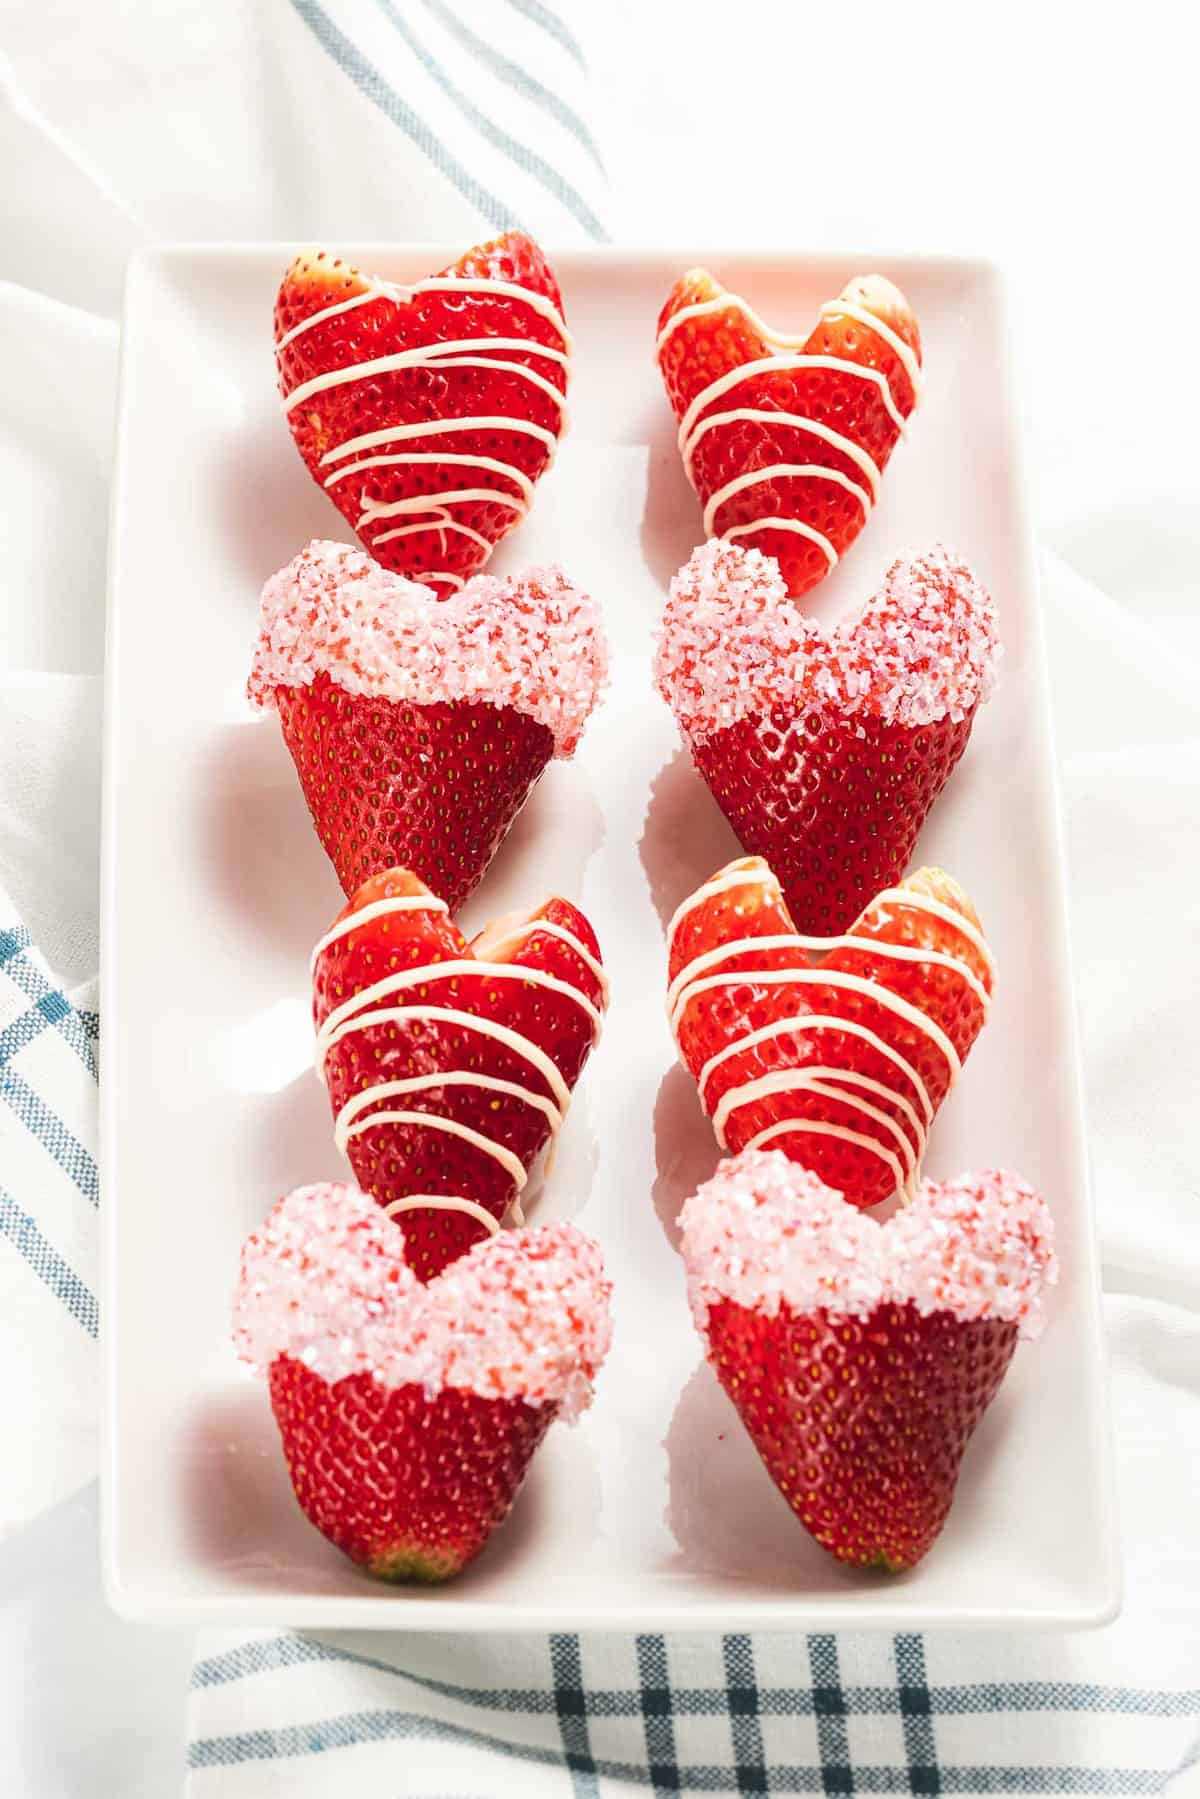 Strawberry hearts decorated with white chocolate and sprinkles.